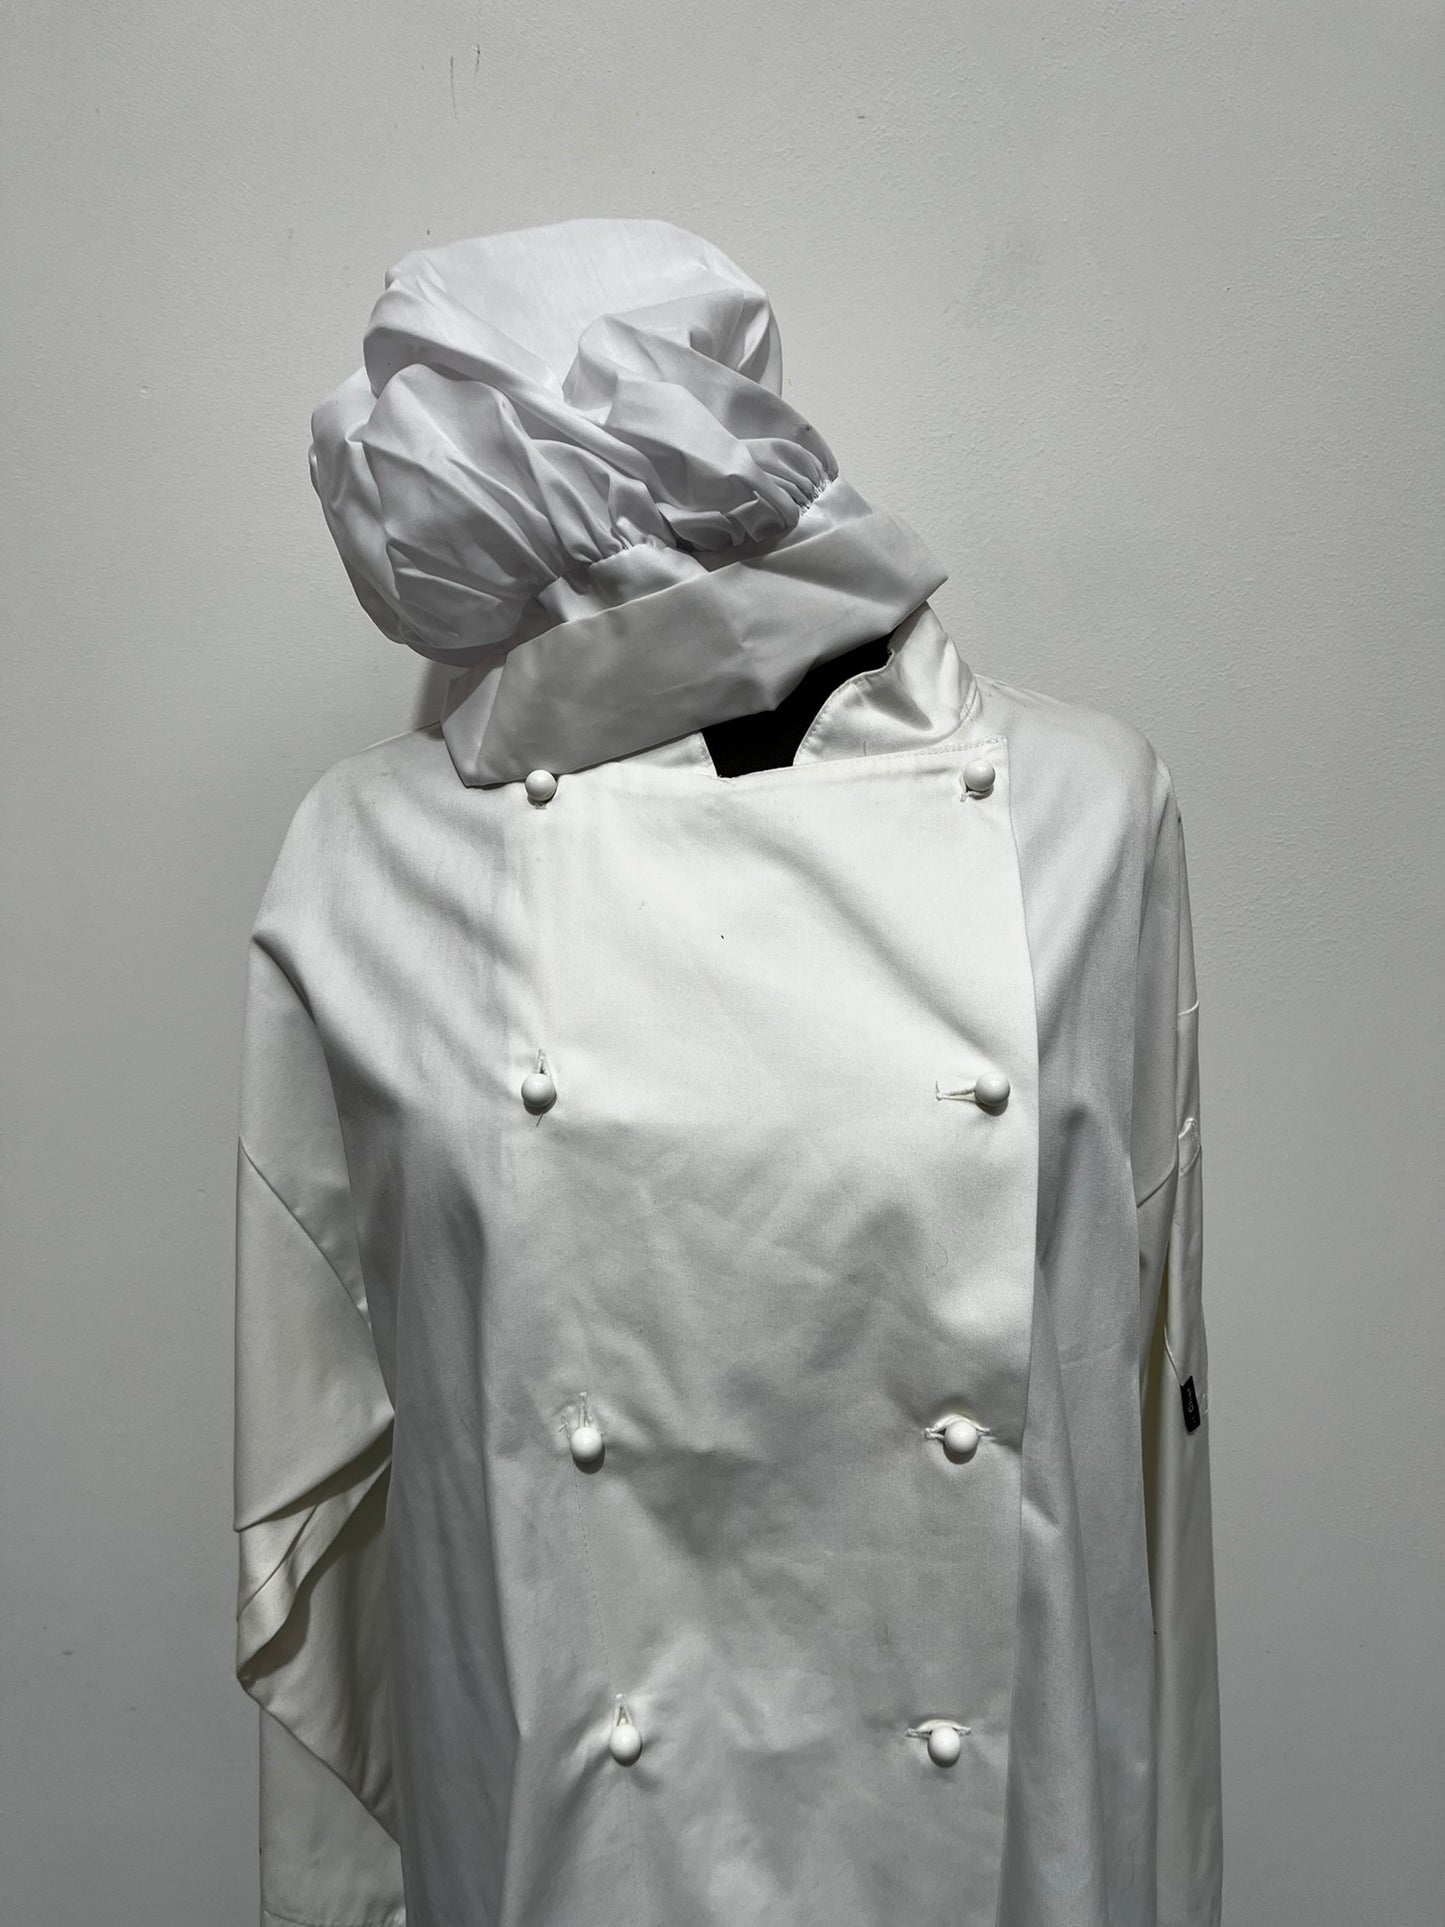 Authentic Chef Whites Uniform in USED Condition Size M/L